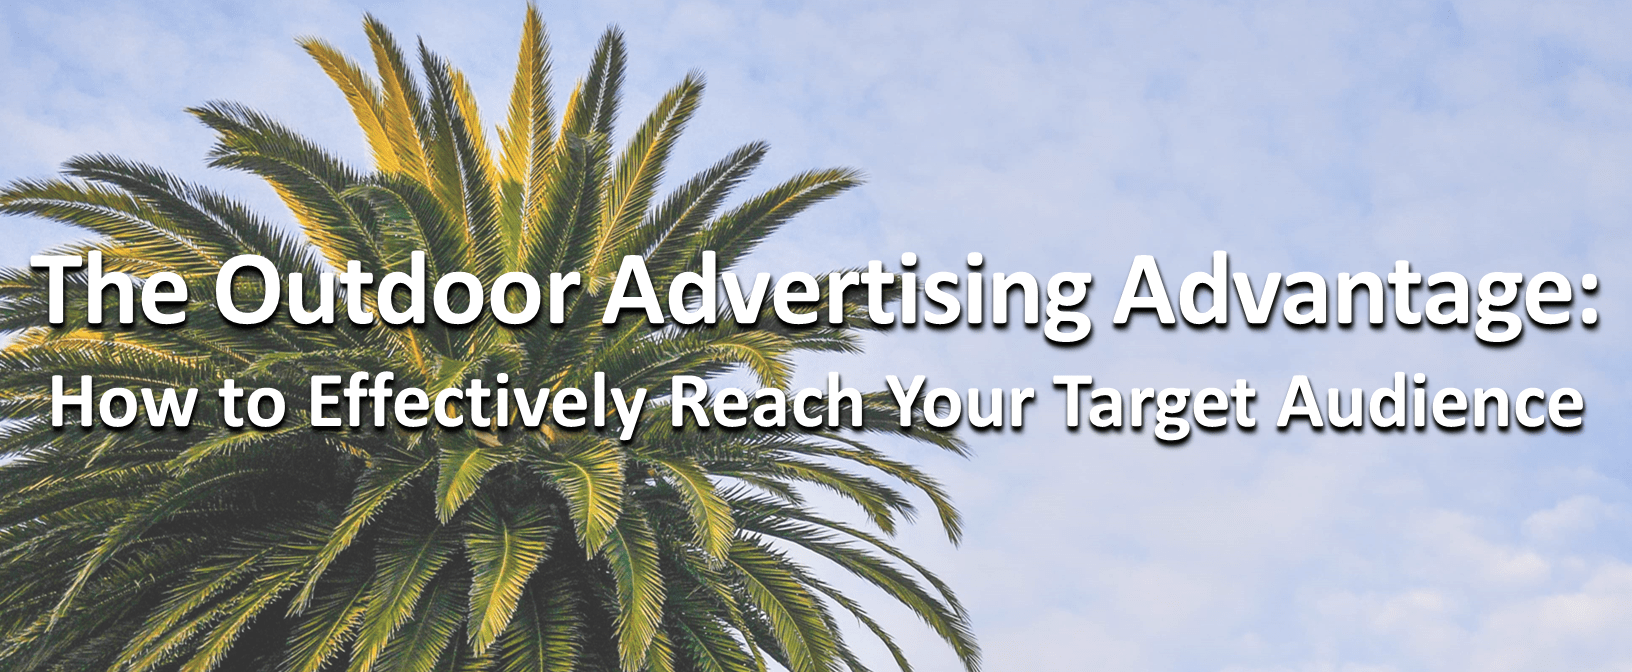 The outdoor advertising advantage